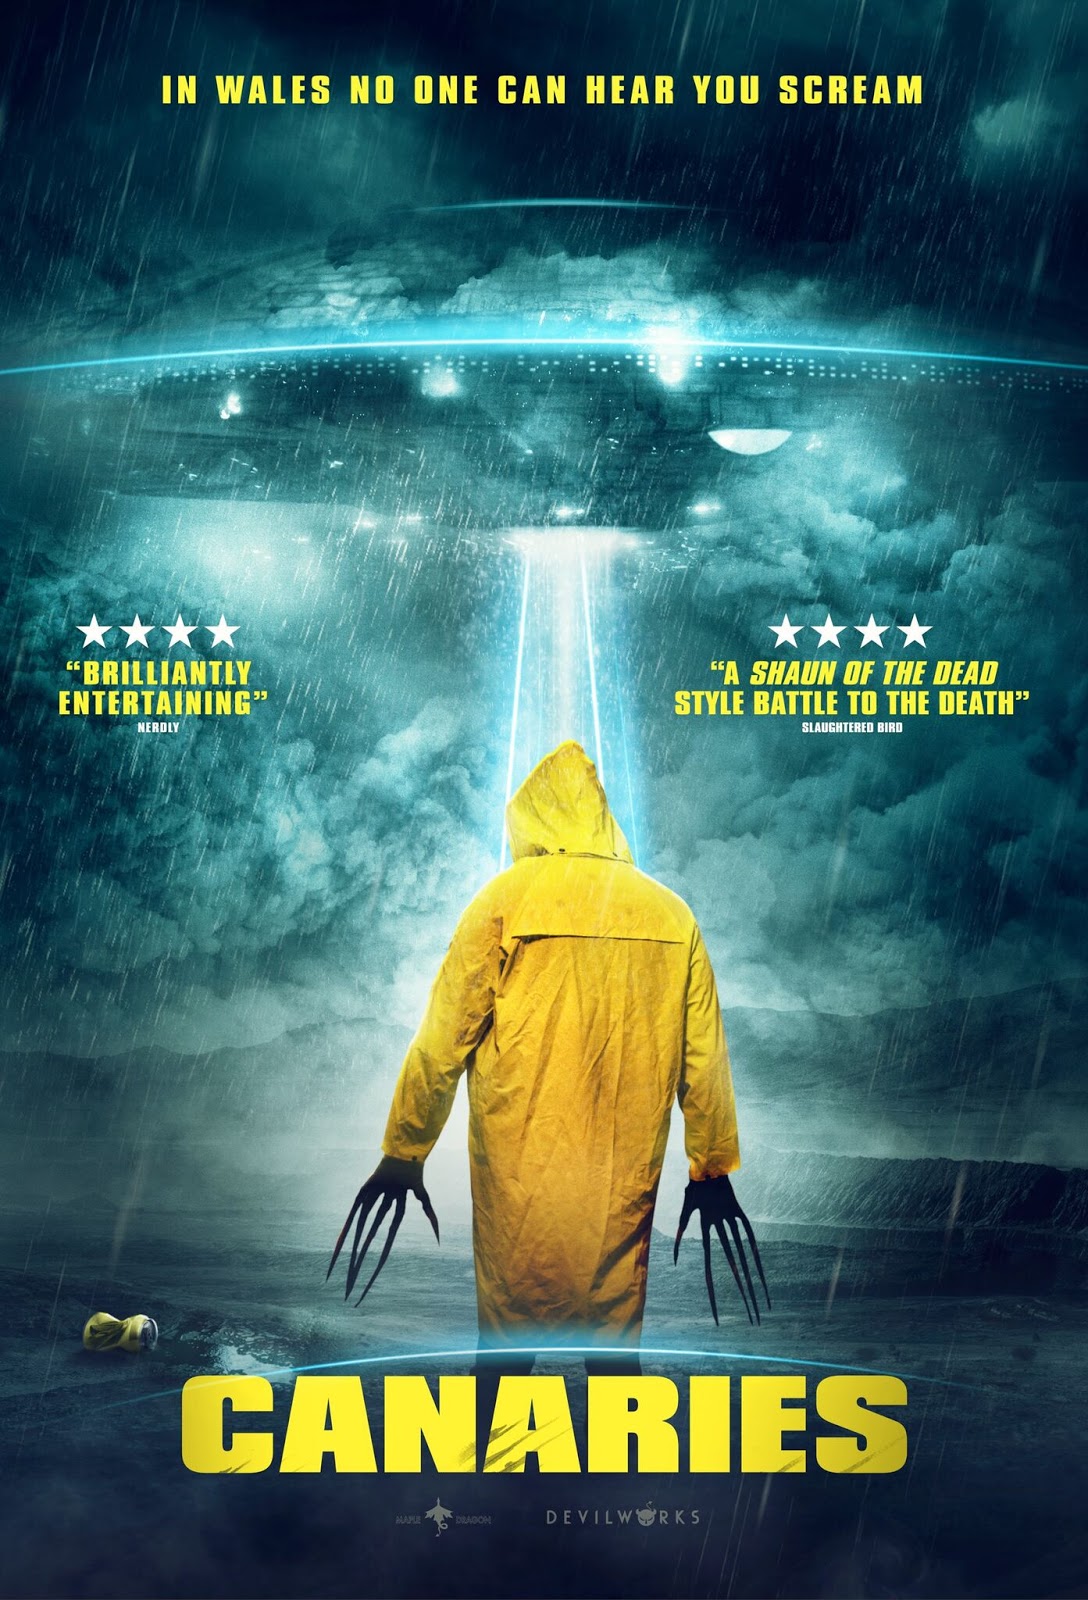 Trailers Trailer & Stills For The SciFi Horror Film Canaries